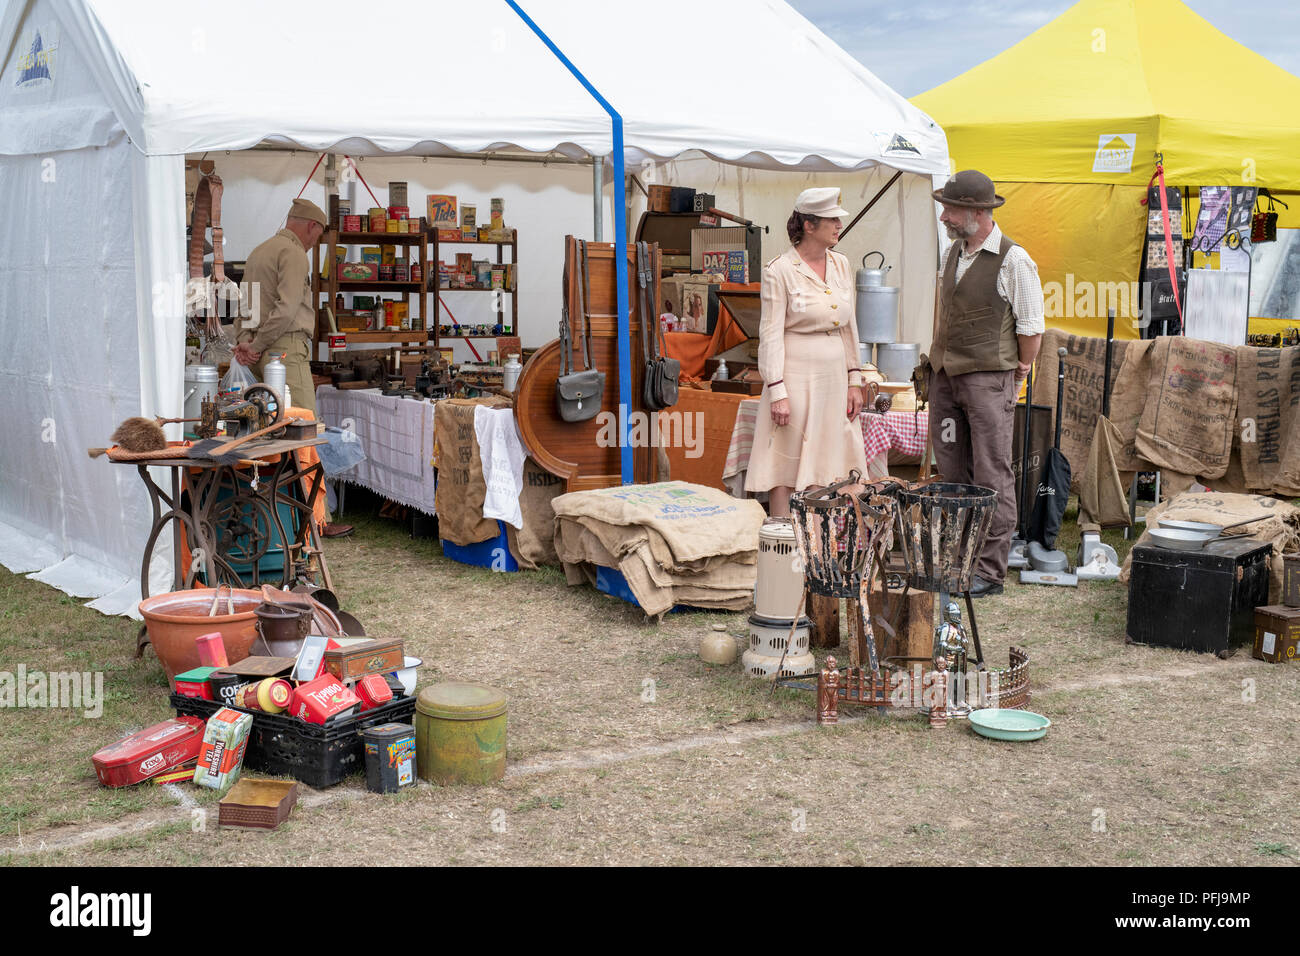 Vintage stall selling old household items at a vintage retro festival. UK Stock Photo